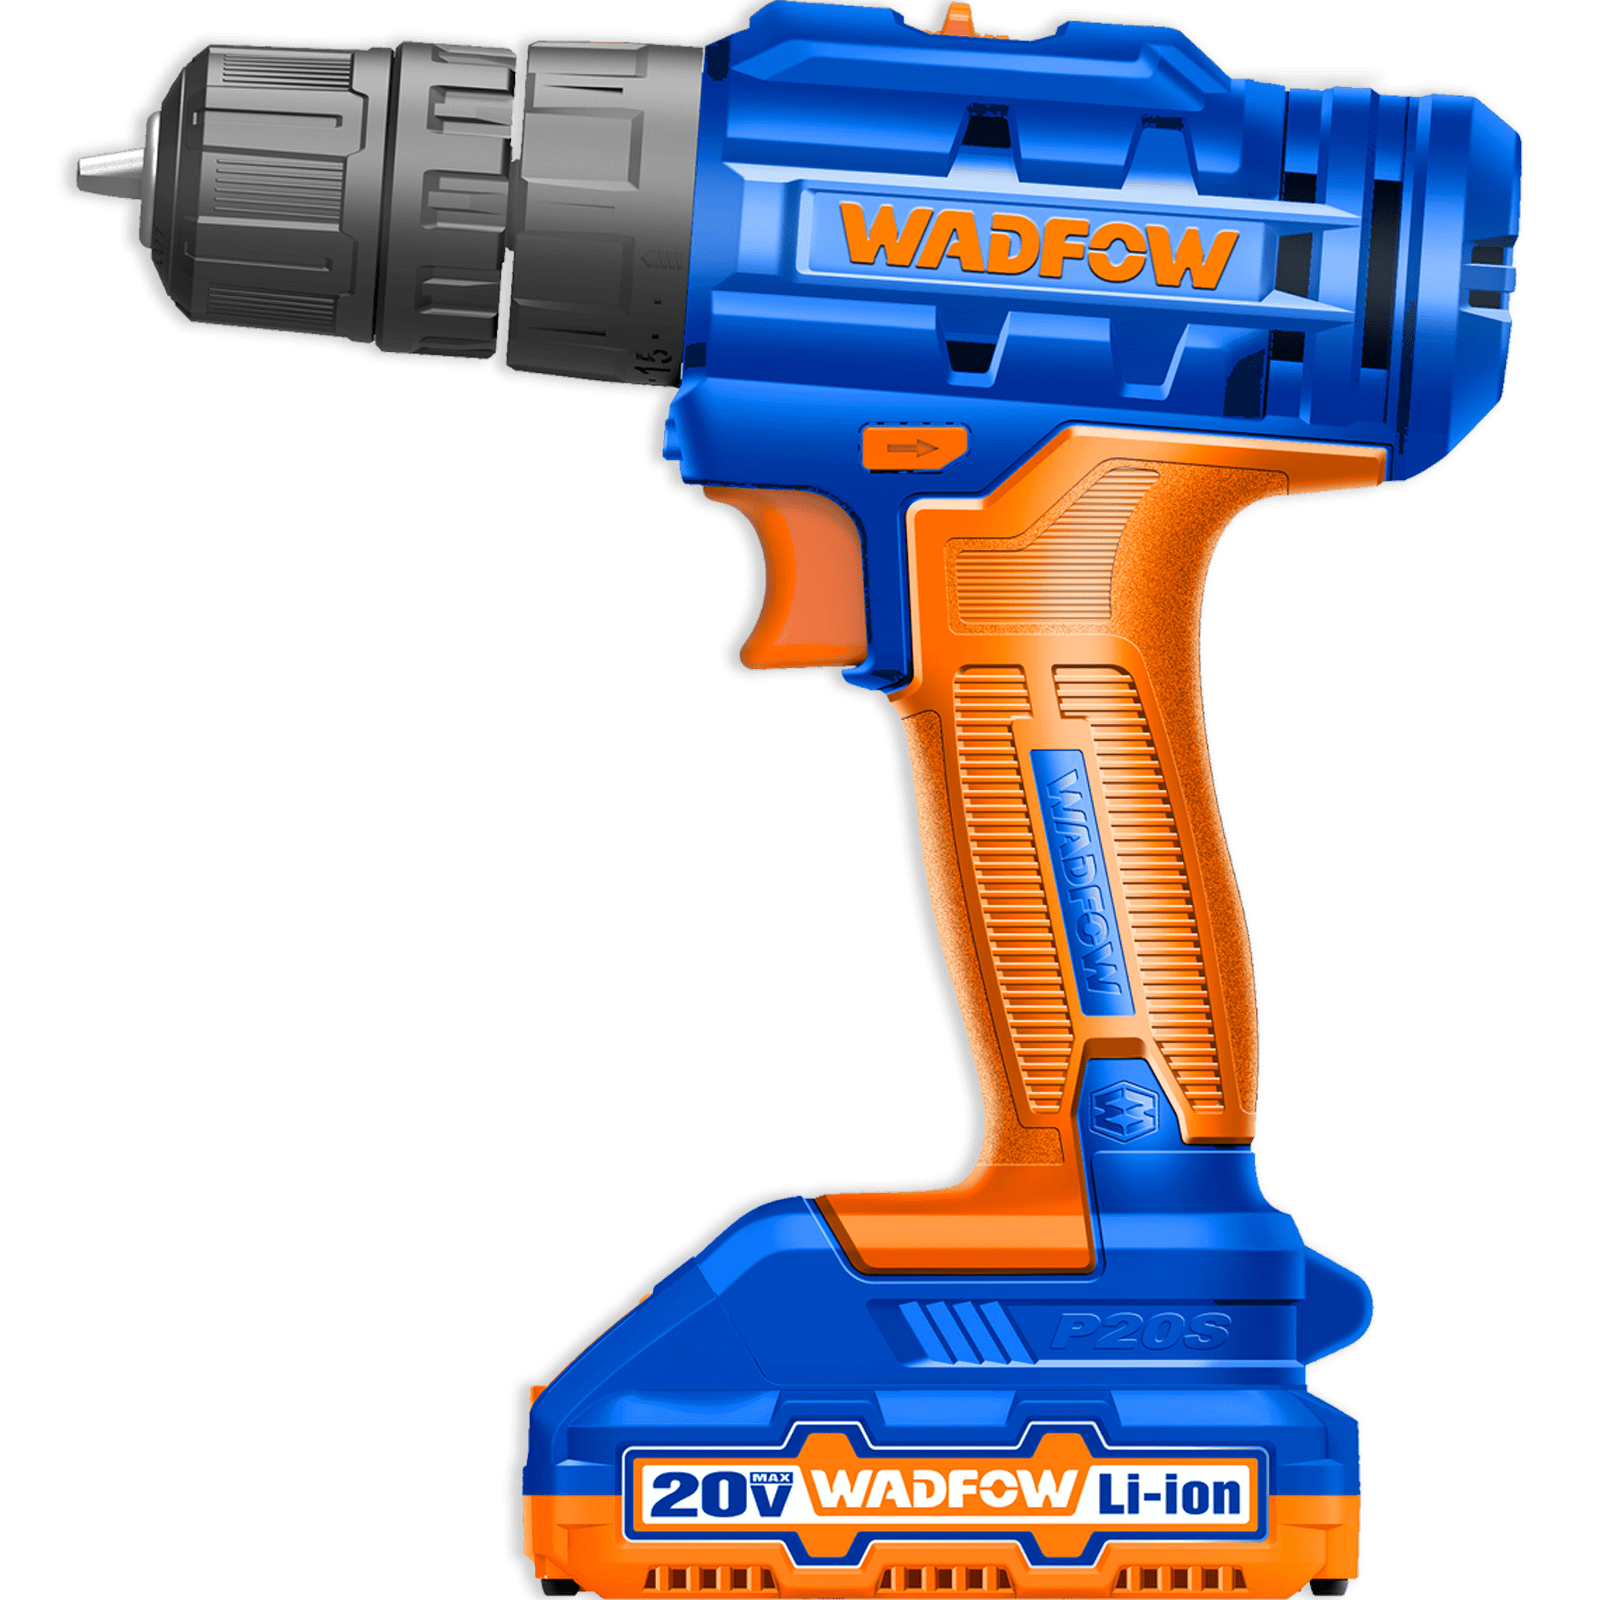 Ingco Lithium-Ion Cordless Drill 20V - CDLI2002 | Buy Online in Accra, Ghana - Supply Master Drill Buy Tools hardware Building materials